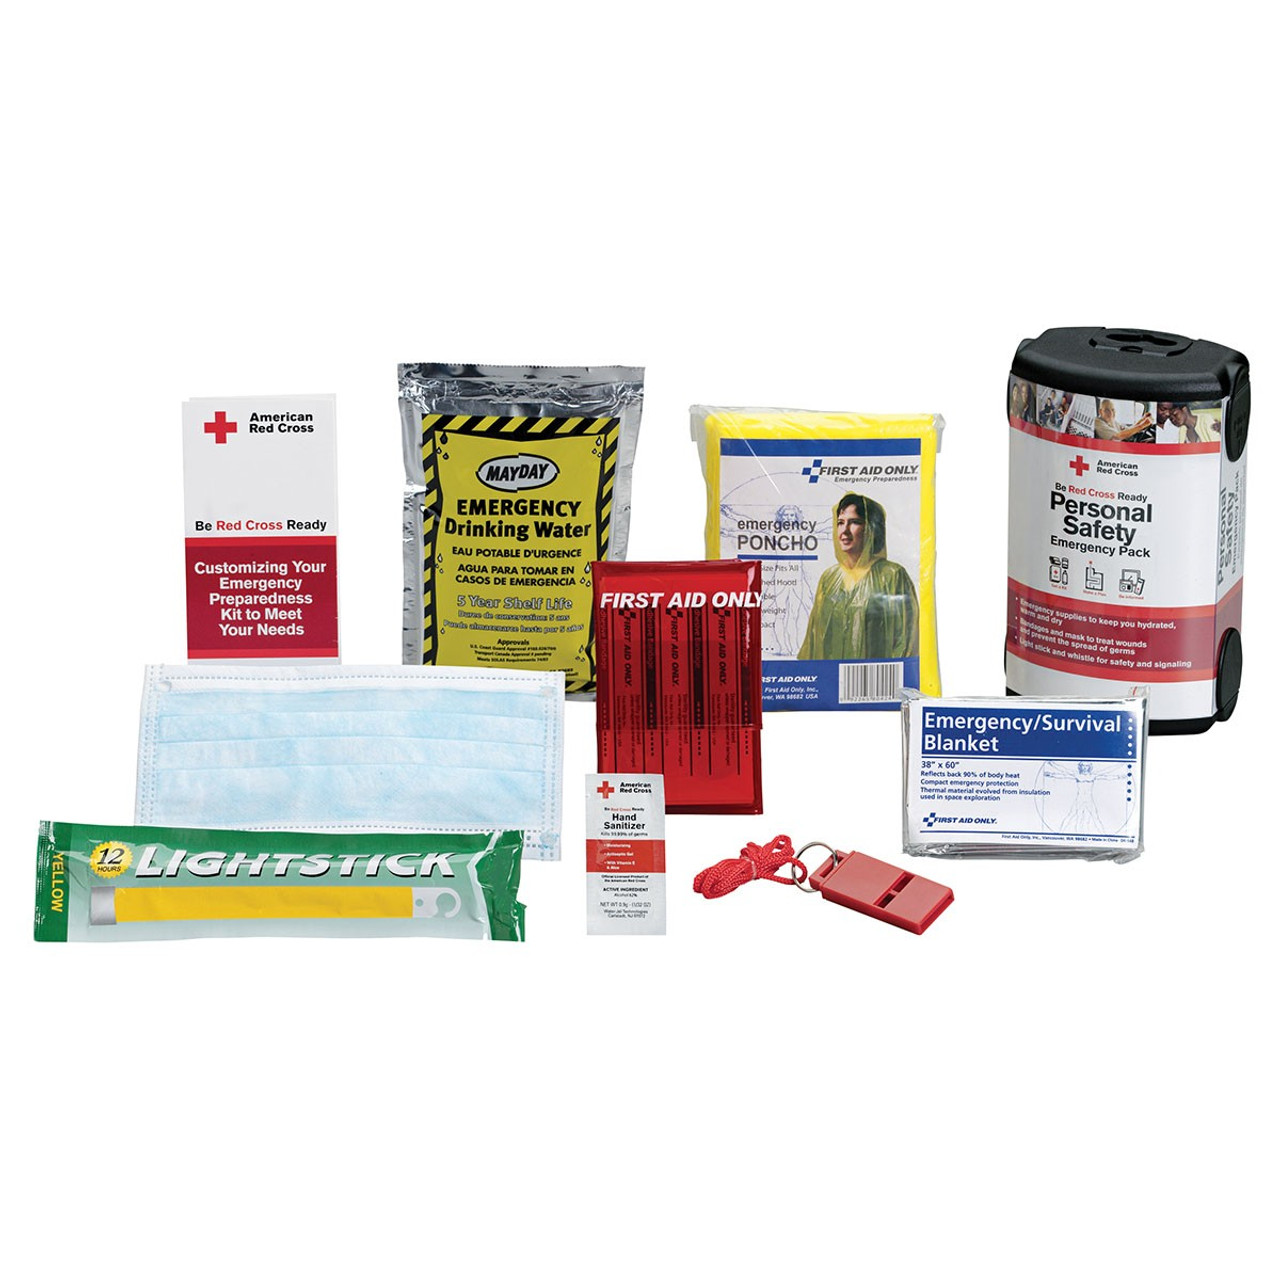 Buy Workplace & Office First Aid KITs - Survival Emergency Solutions